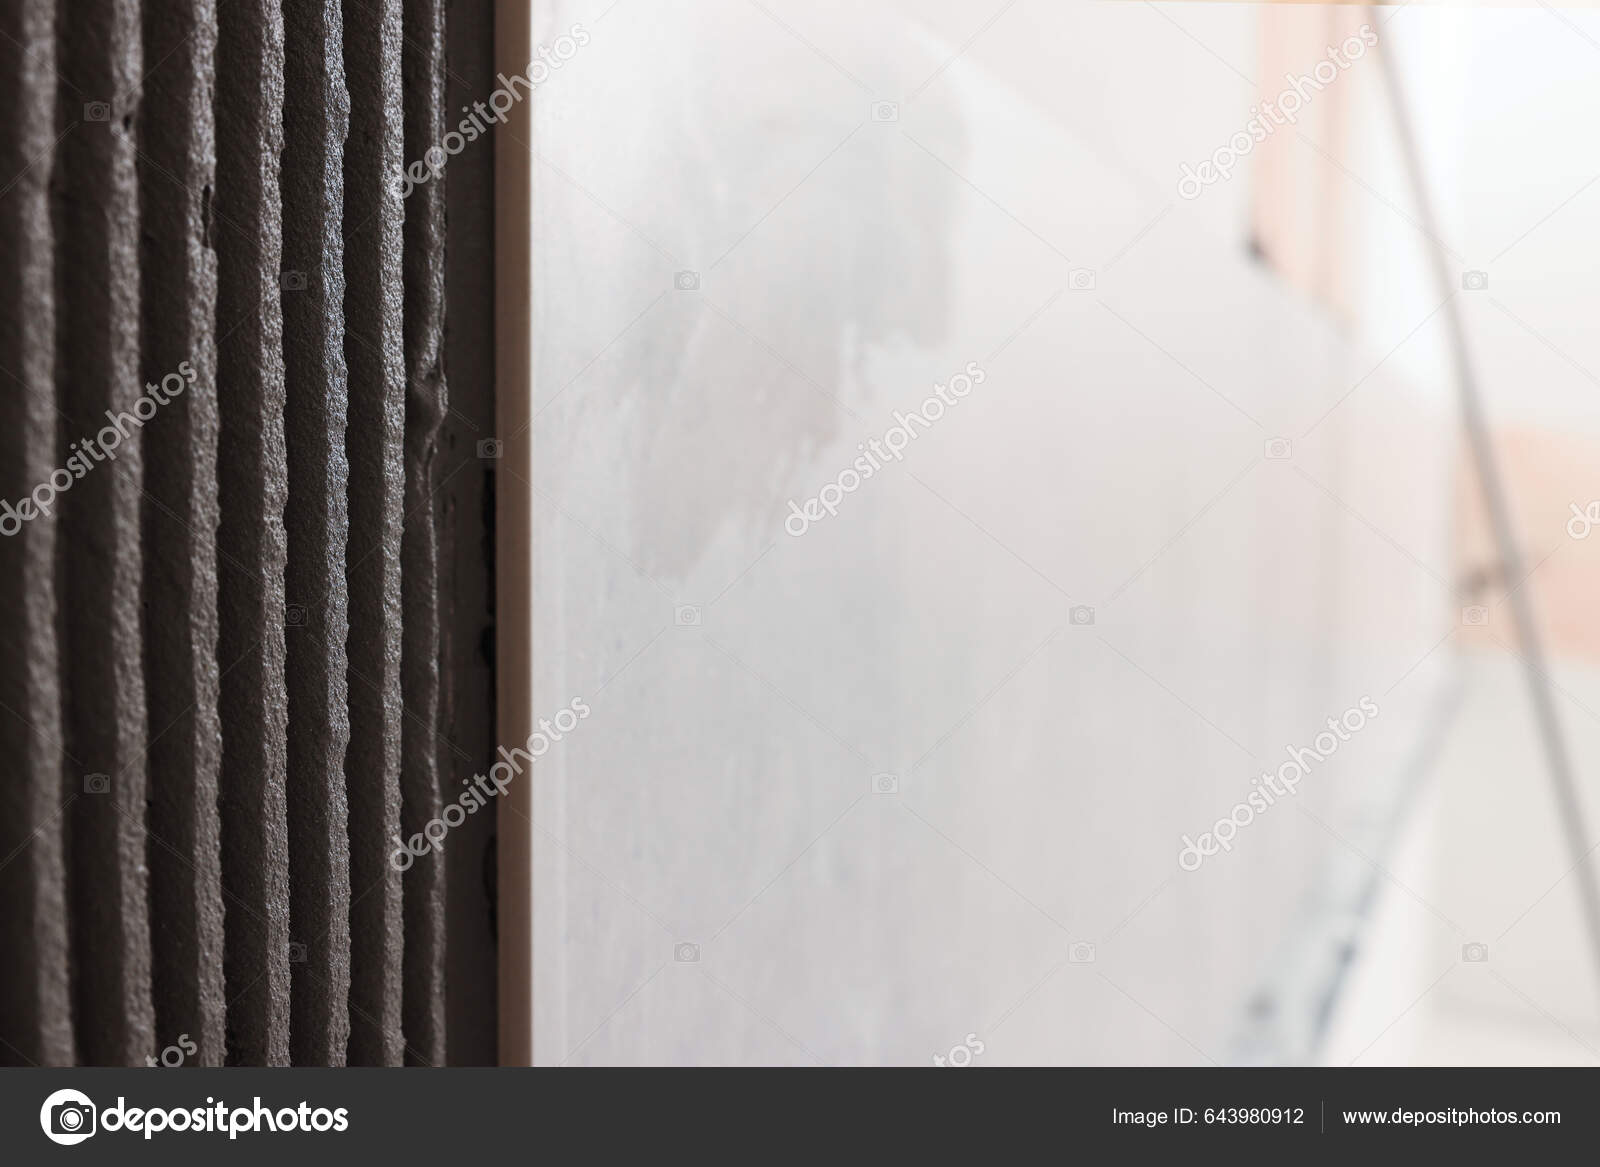 Adhesive Mix Tiles On Wall Indoors Stock Photo 2230229803